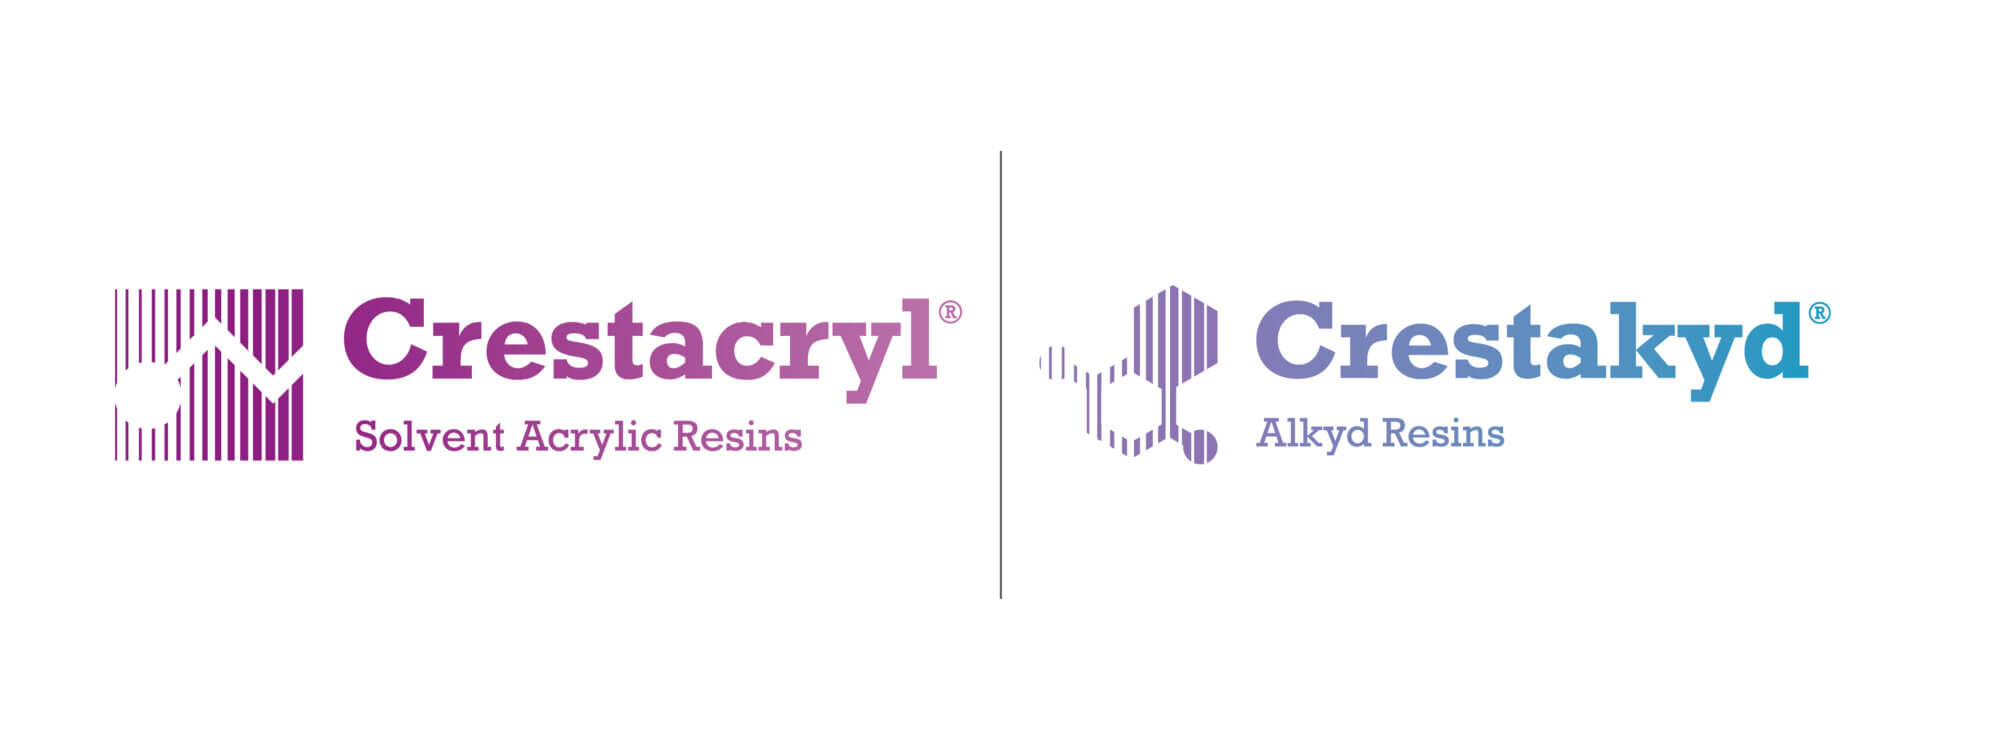 An exciting new look for Crestacryl<sup>®</sup> and Crestakyd<sup>®</sup>